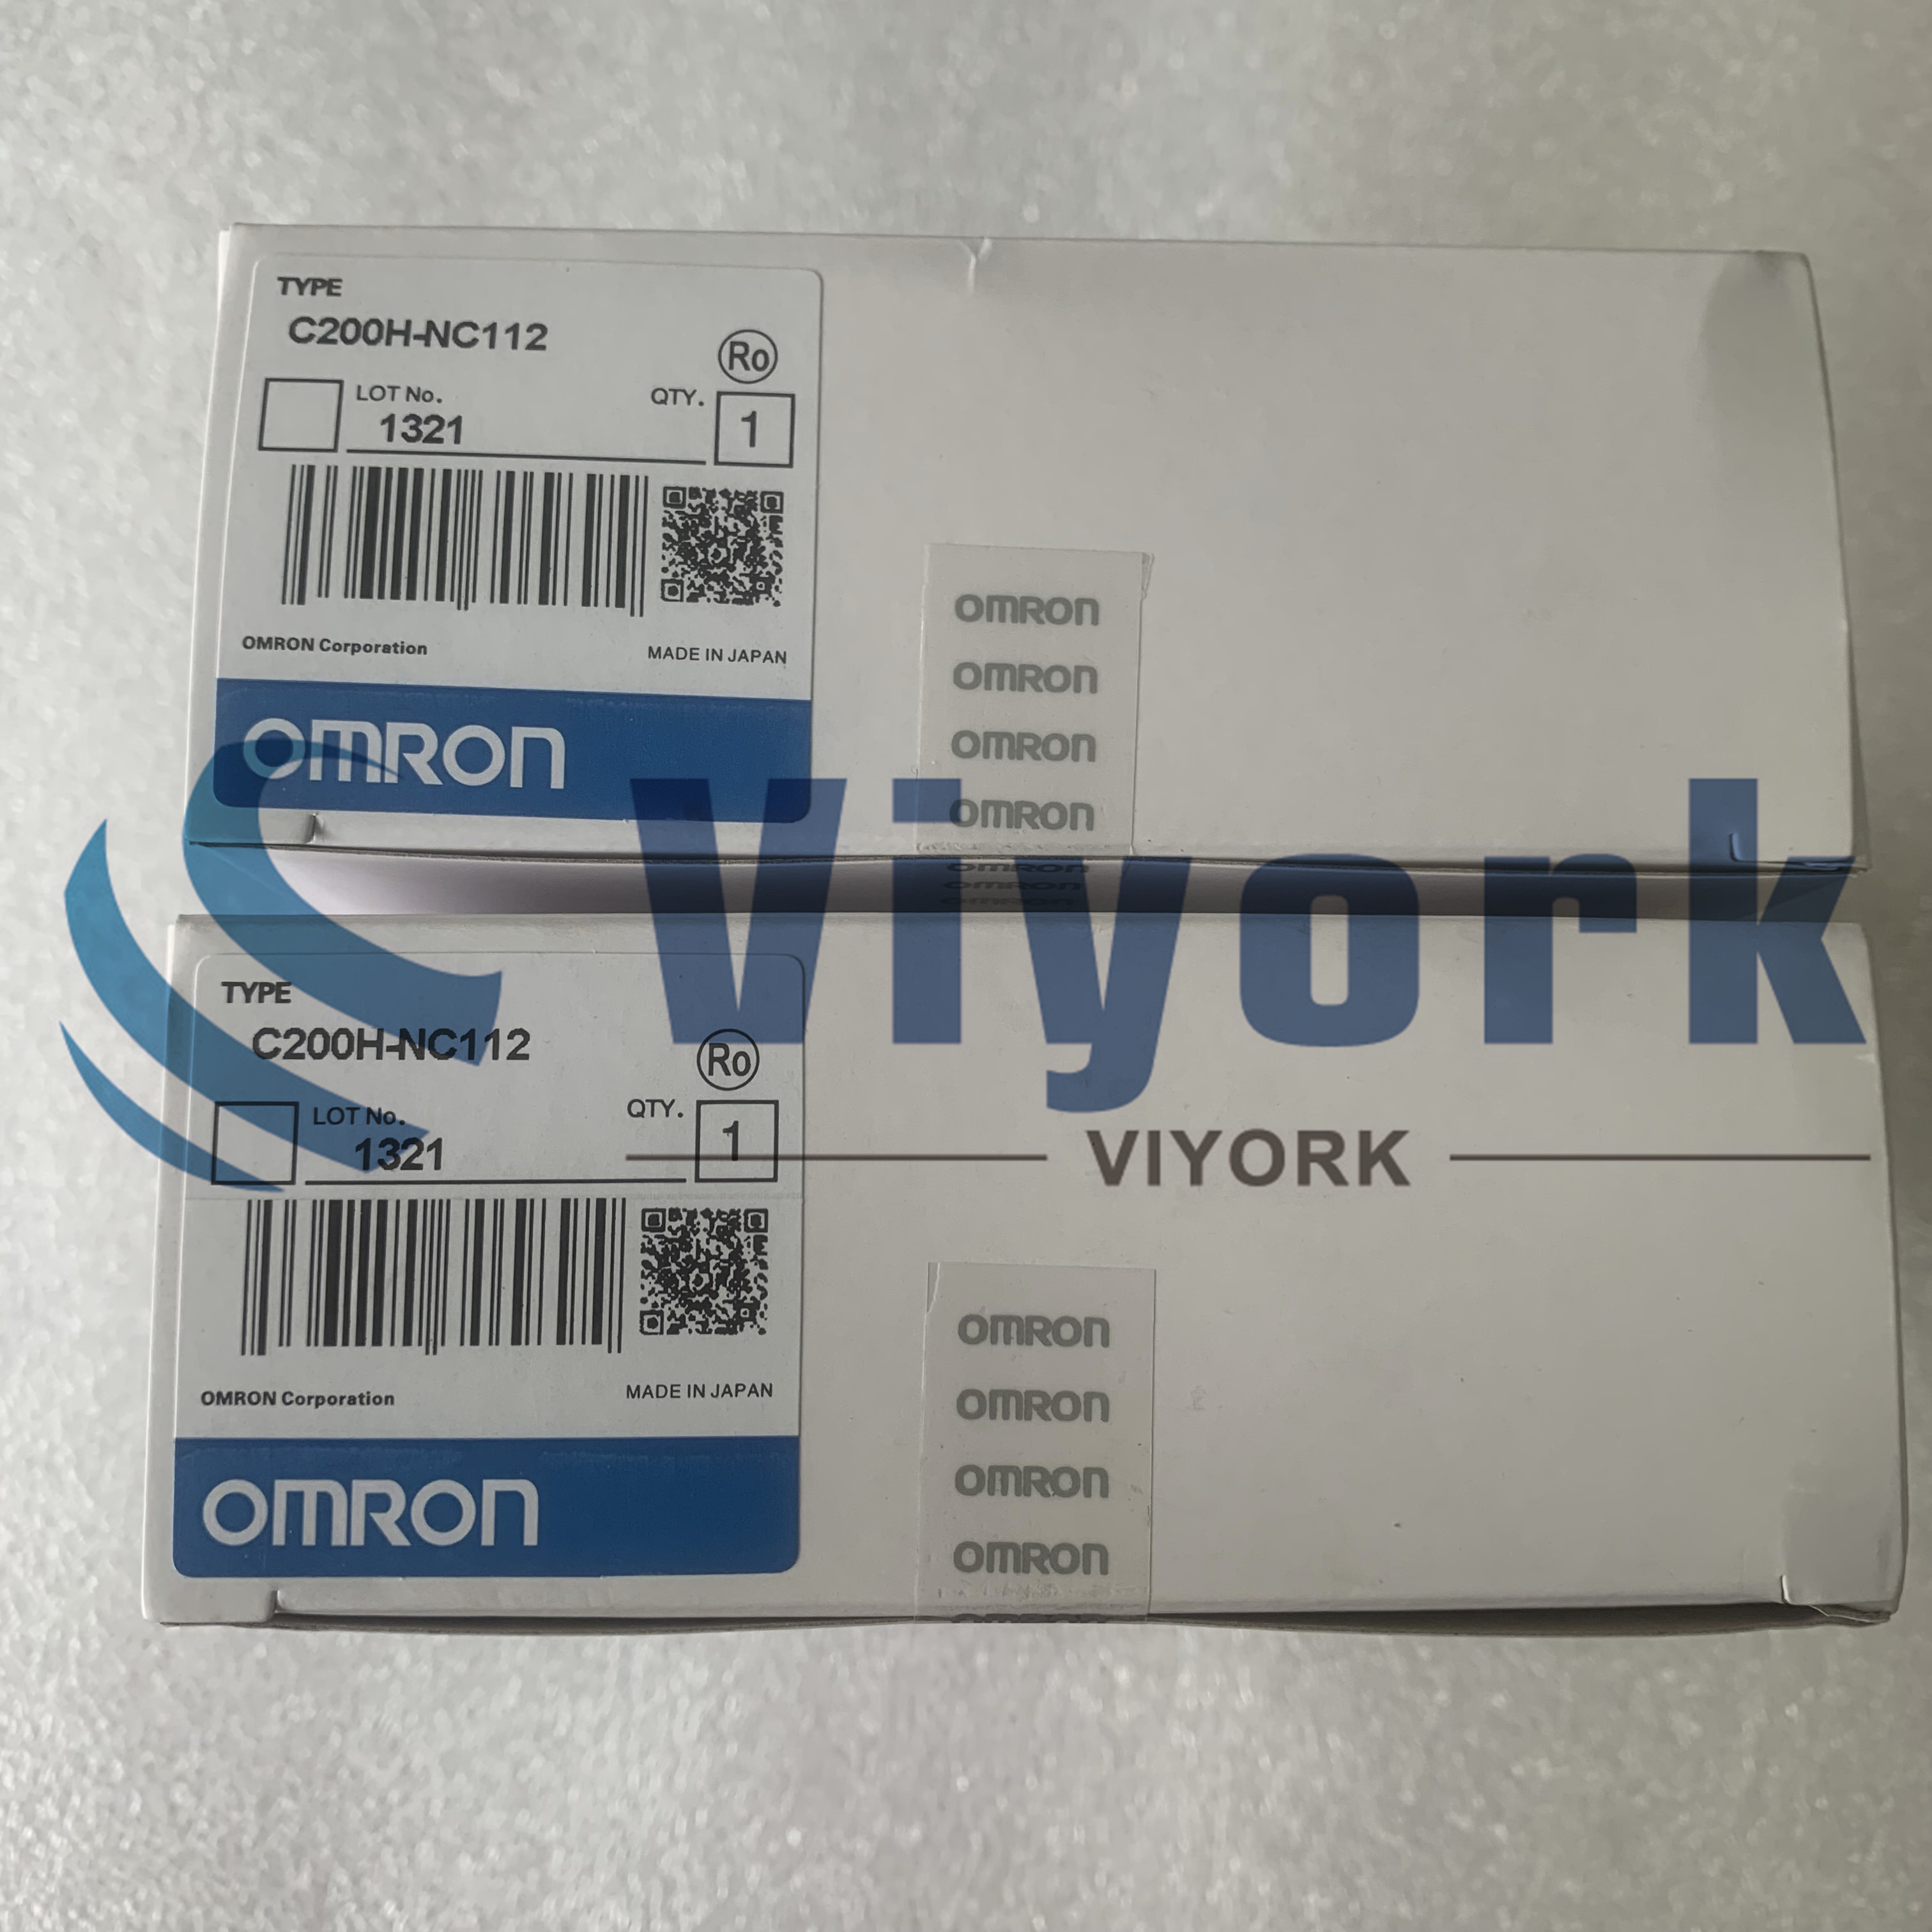 Omron C200H-NC112 STEPPER CONTROL UNIT 200 KHZ 12-24 VDC IN 5-24 VDC OUT NEW